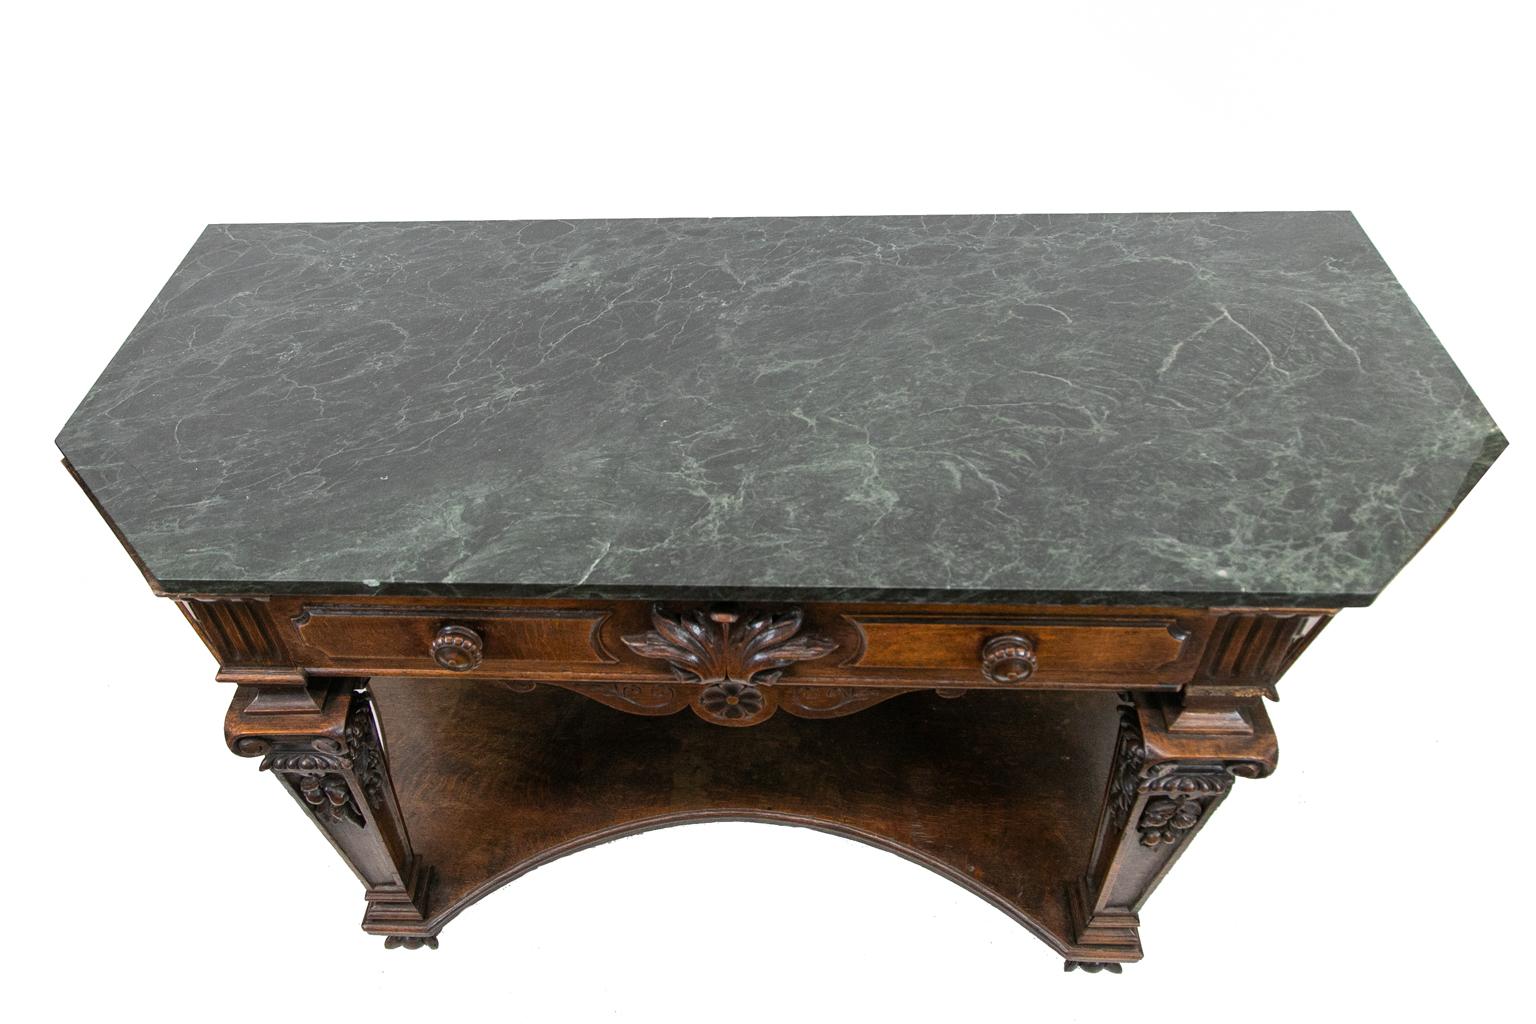 English marble top console table, with the drawer having an acanthus leaf carved in high relief. The chamfered sides and drawers have molded panels. The legs have carved volutes surmounting carved gadrooning which a tops fruit carvings in high